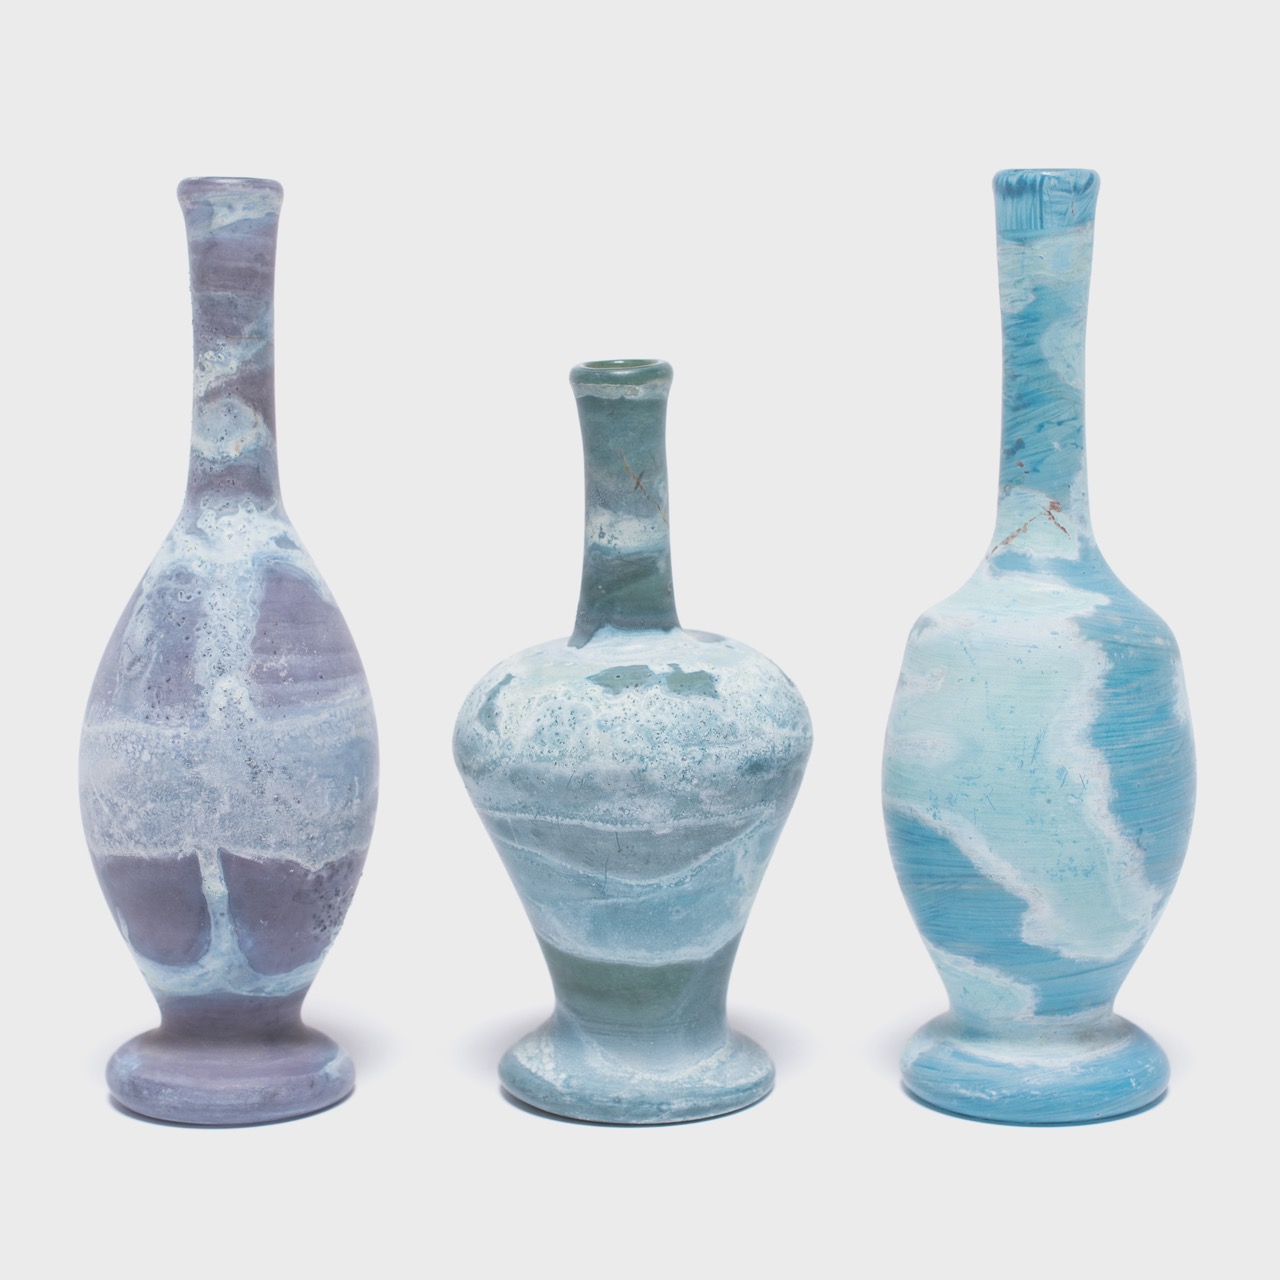 Three small vessels, designed to collect tears